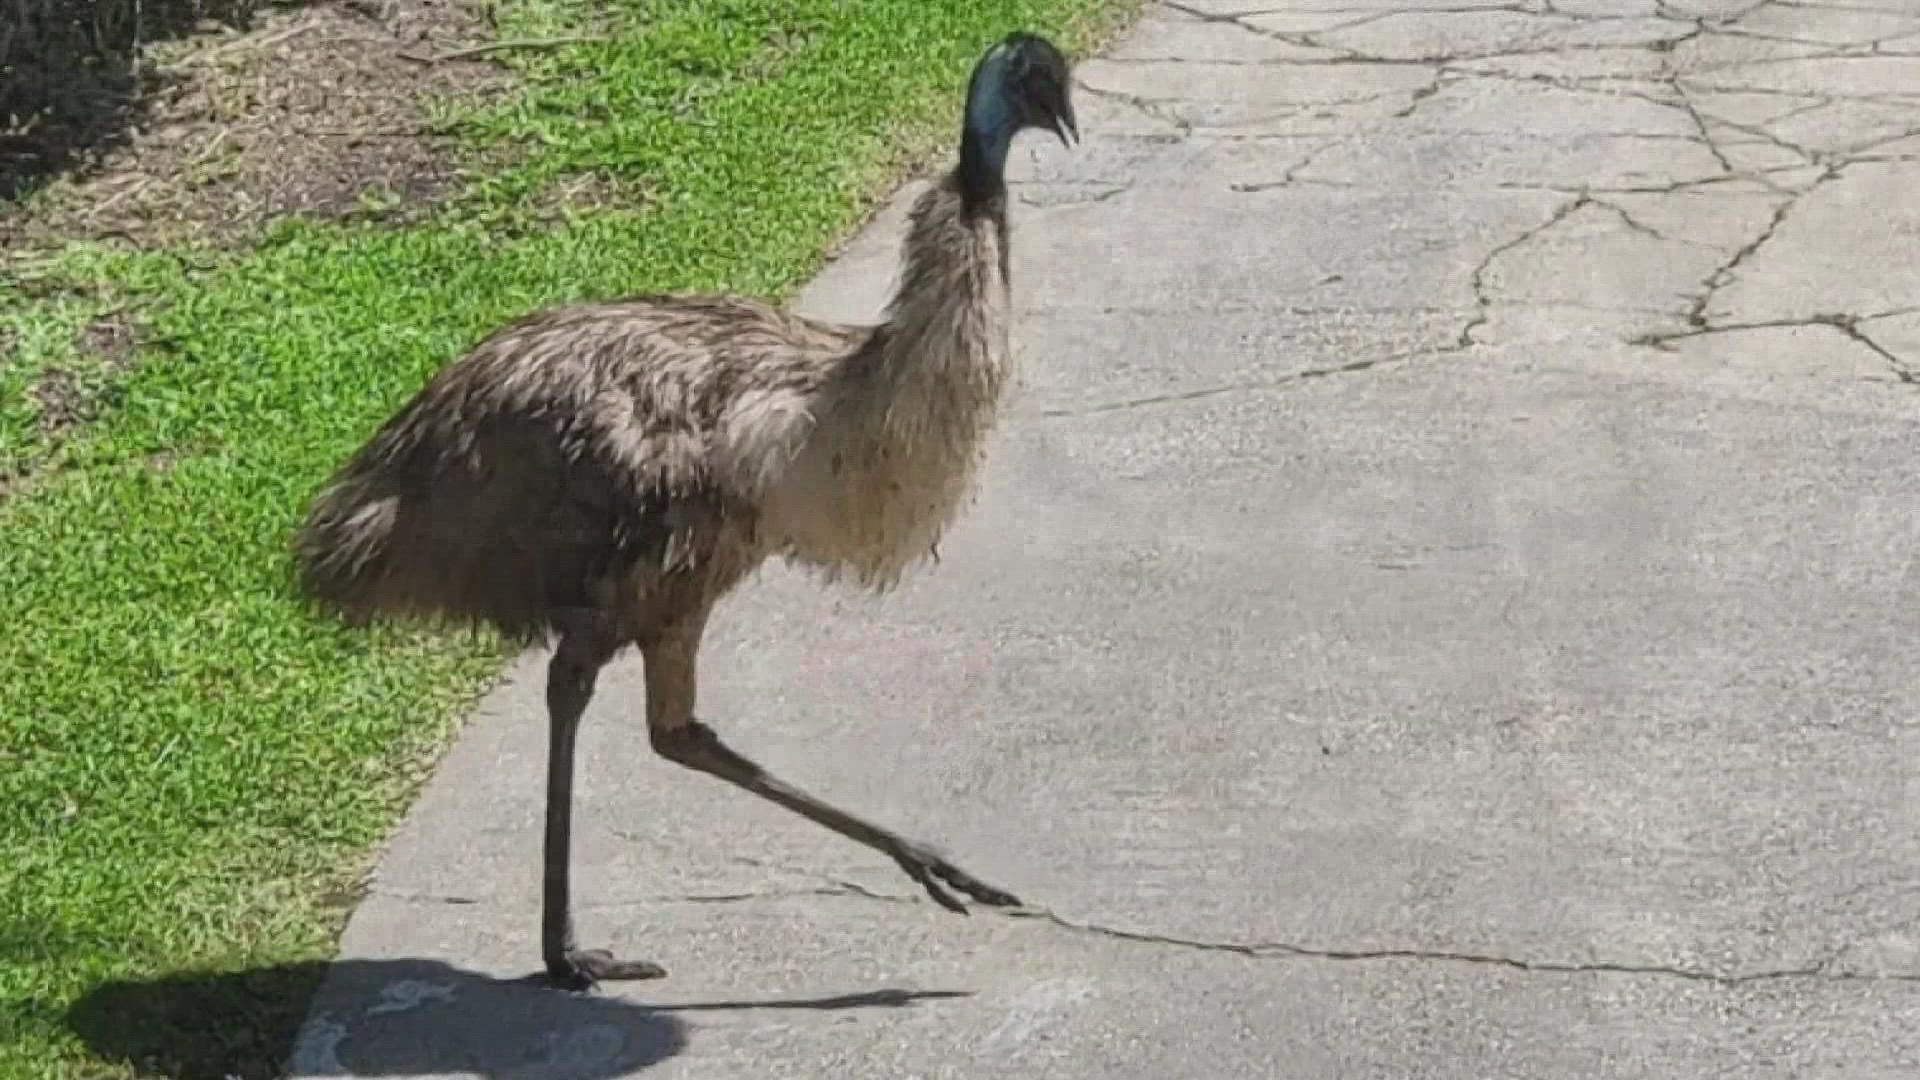 An Emu got loose from an enclosure last week, and neighbors still can't believe their eyes.